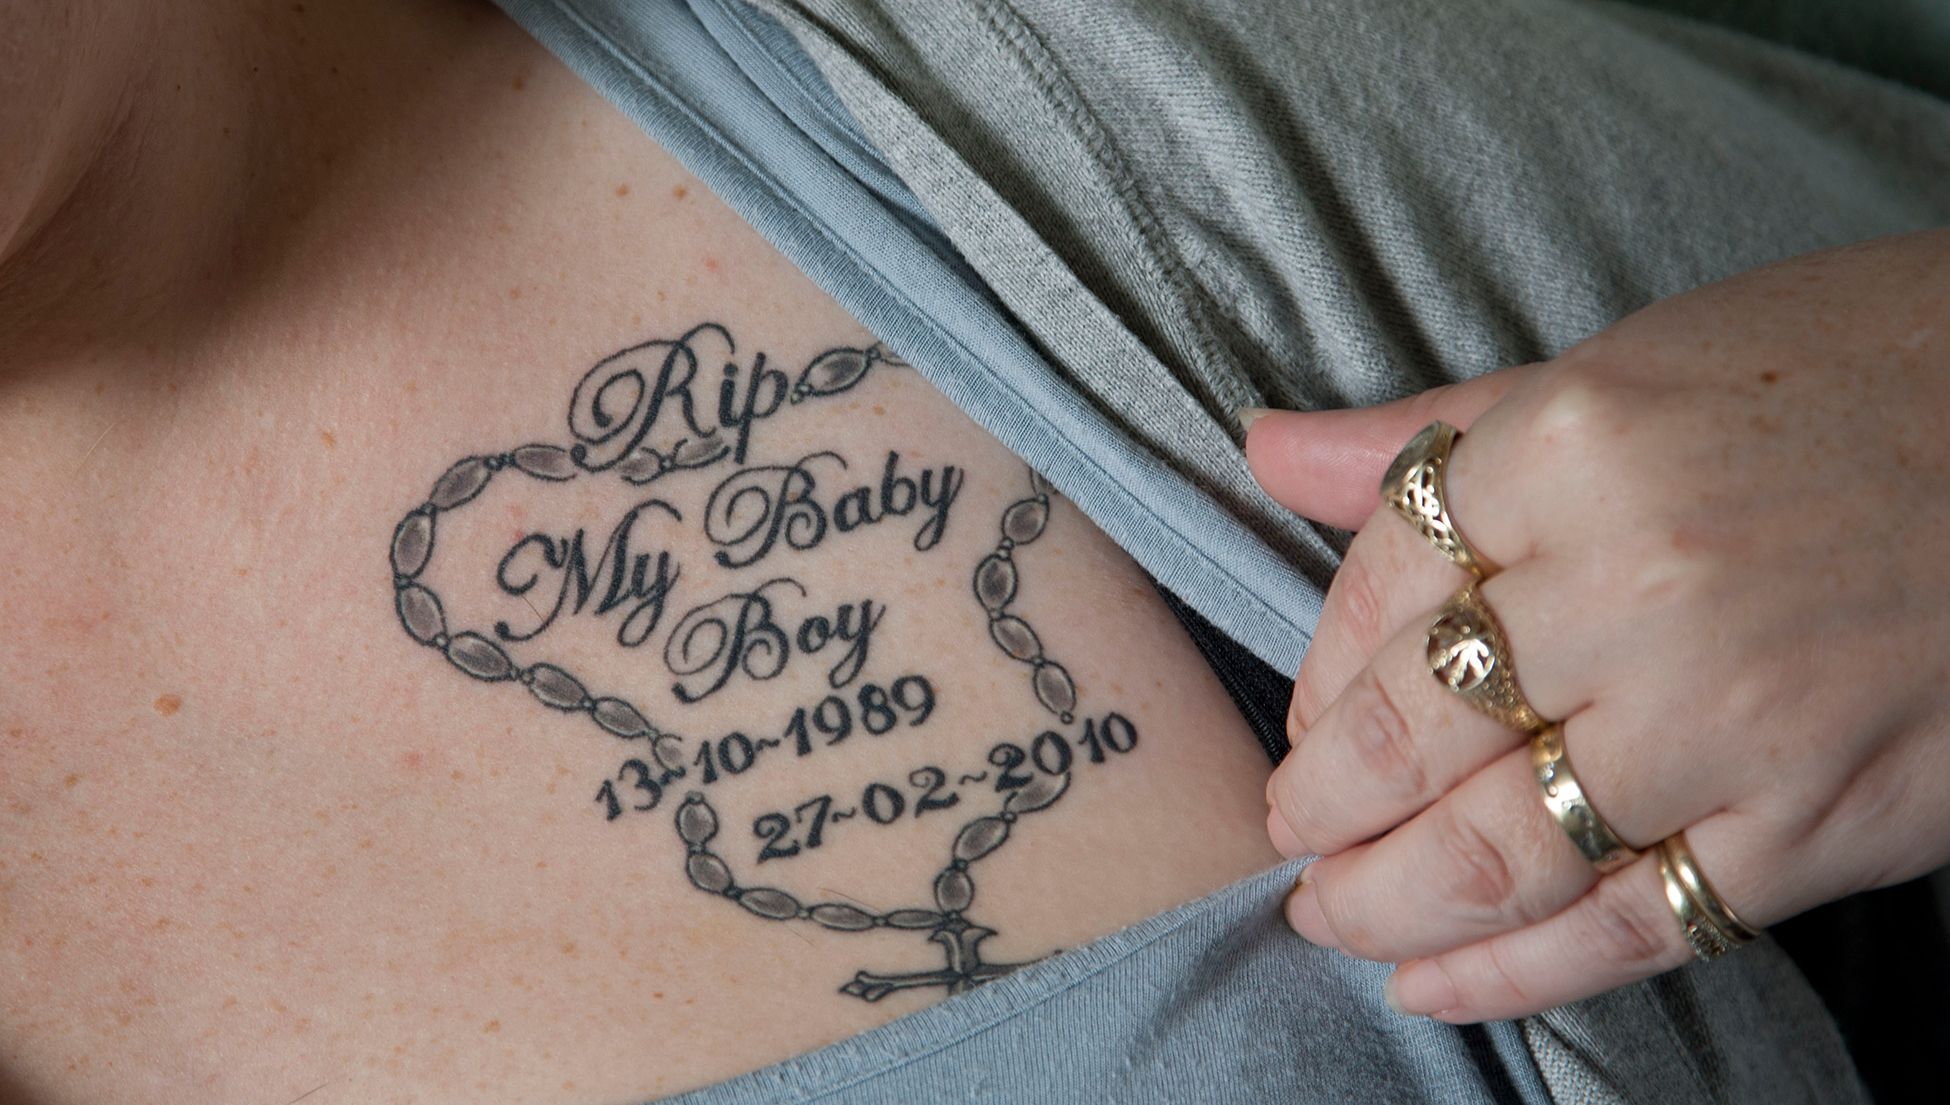 A tattoo is for life': how memorial tattoos help the bereaved